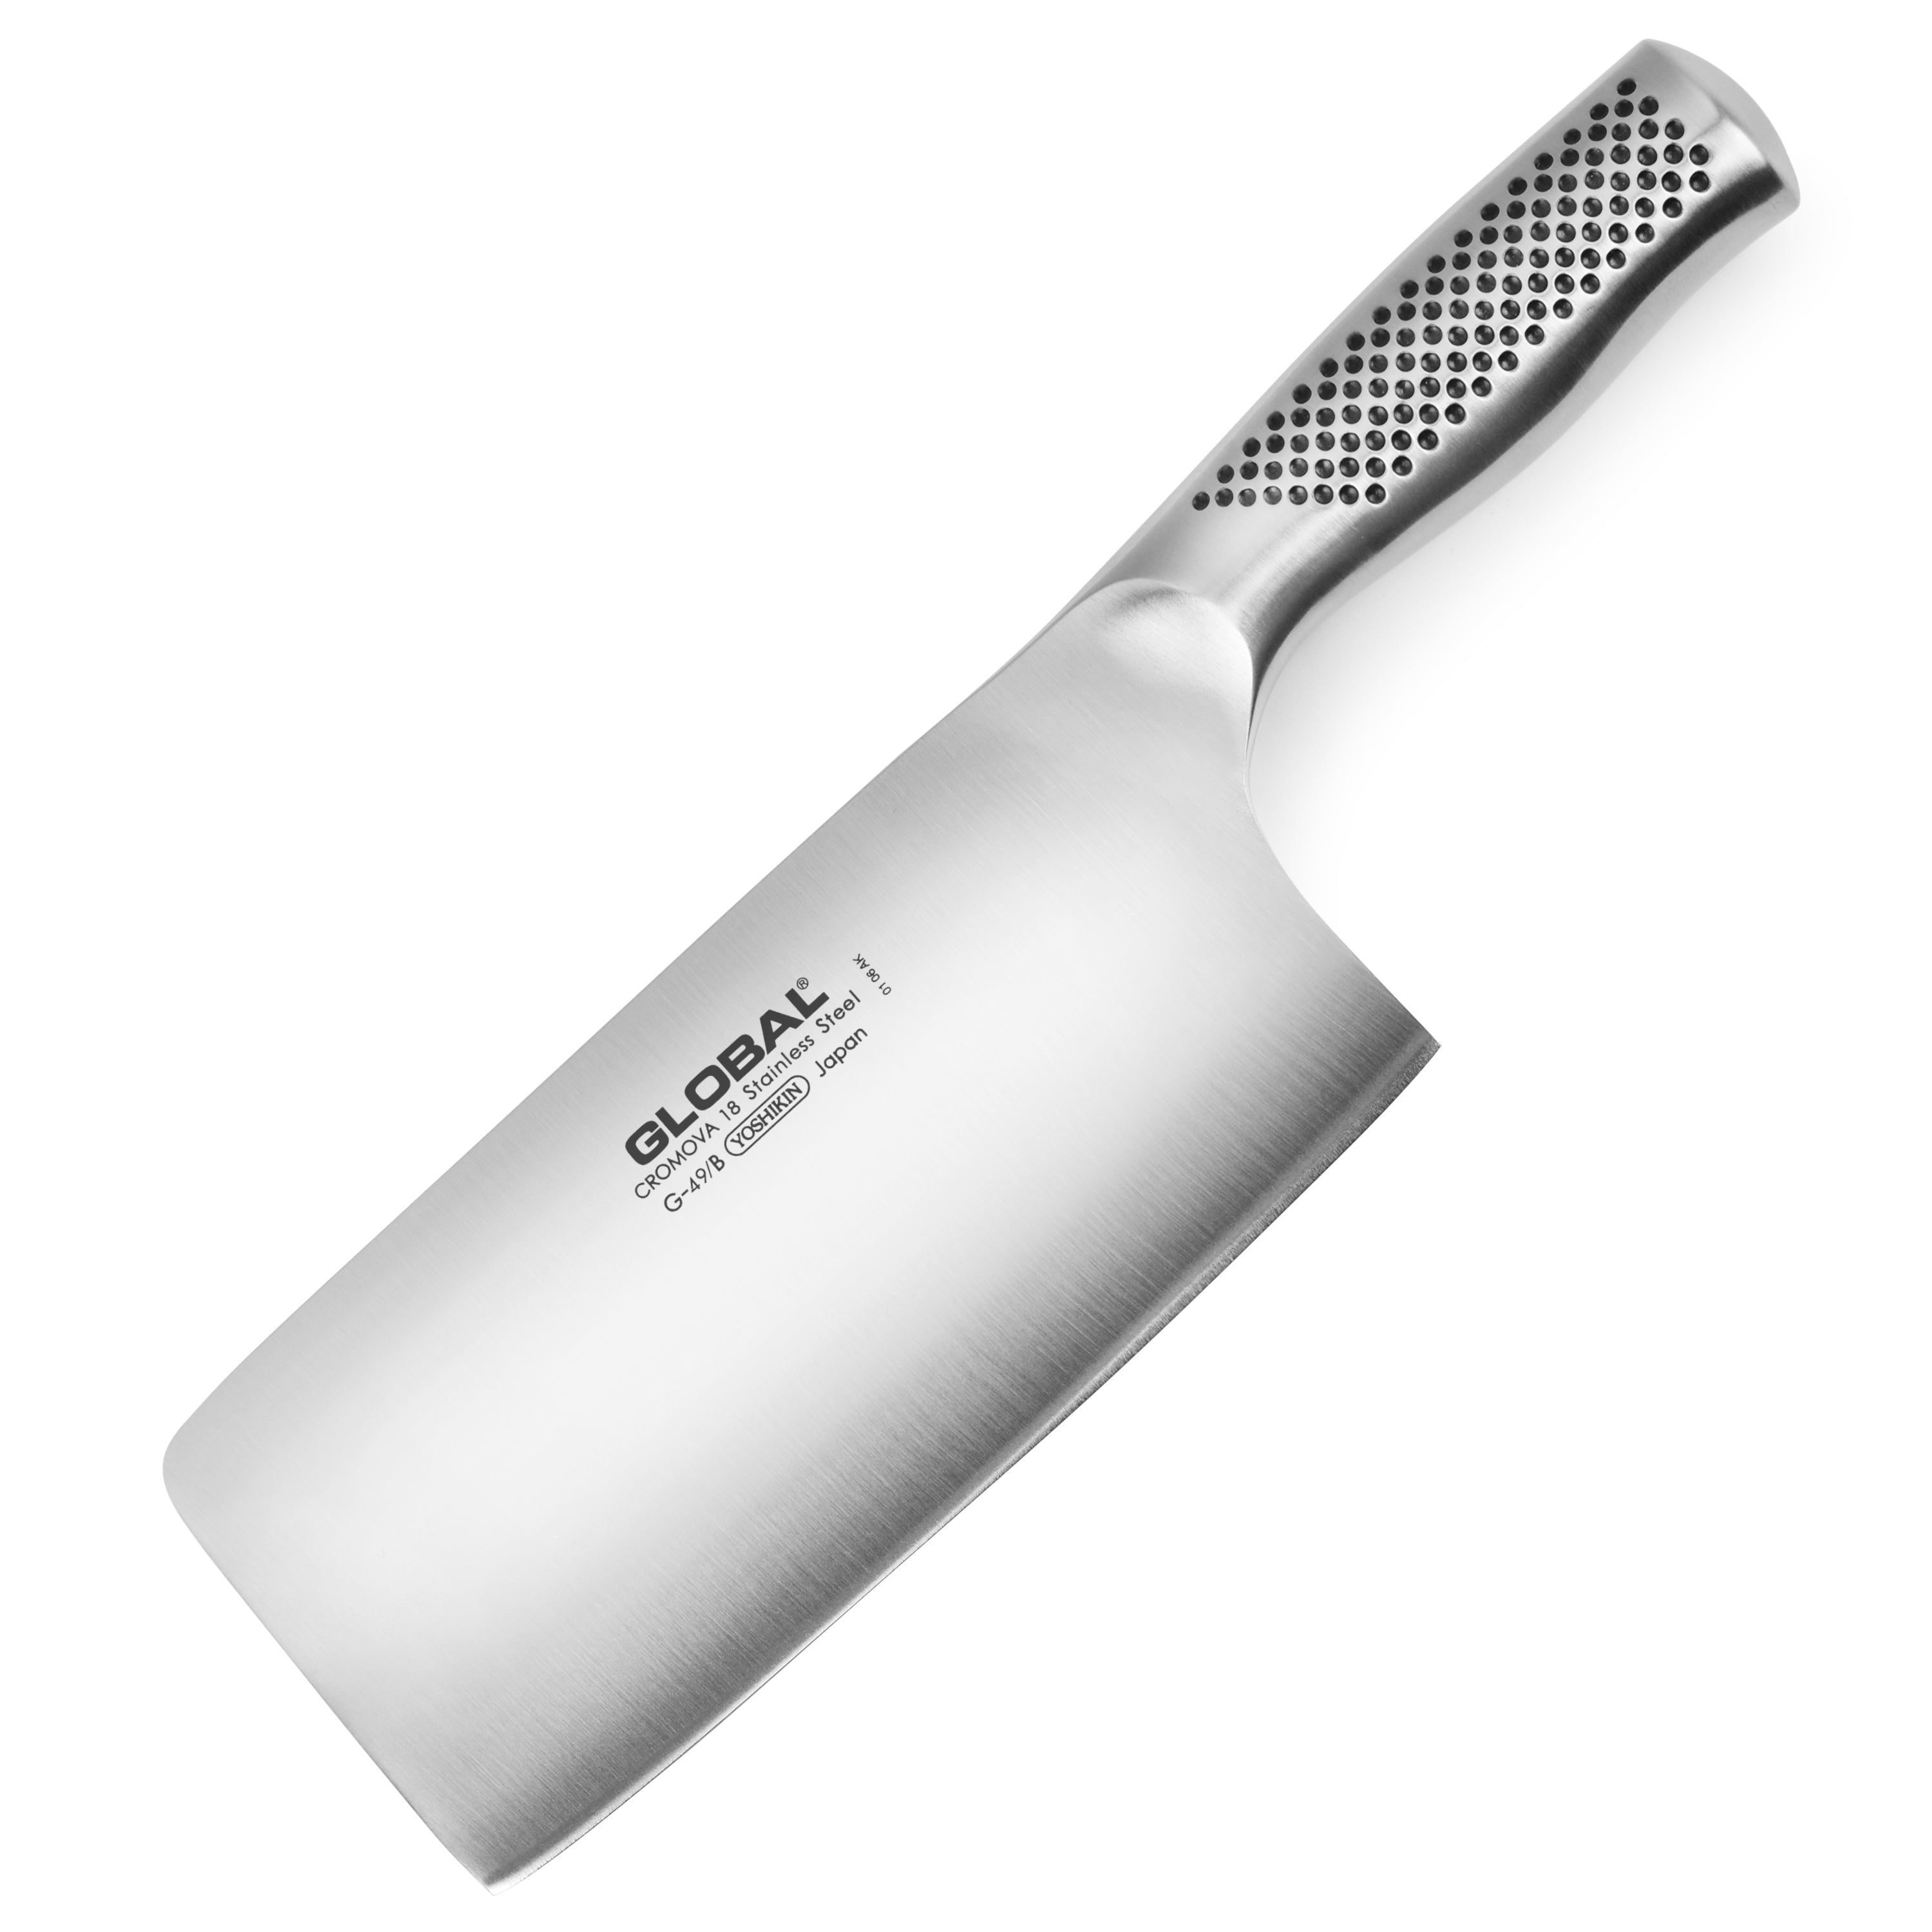  Global Kitchen-Knives Chop & Slice 7-3/4-Inch Chinese Chef's  Knife/Cleaver, Stainless Steel: Home & Kitchen